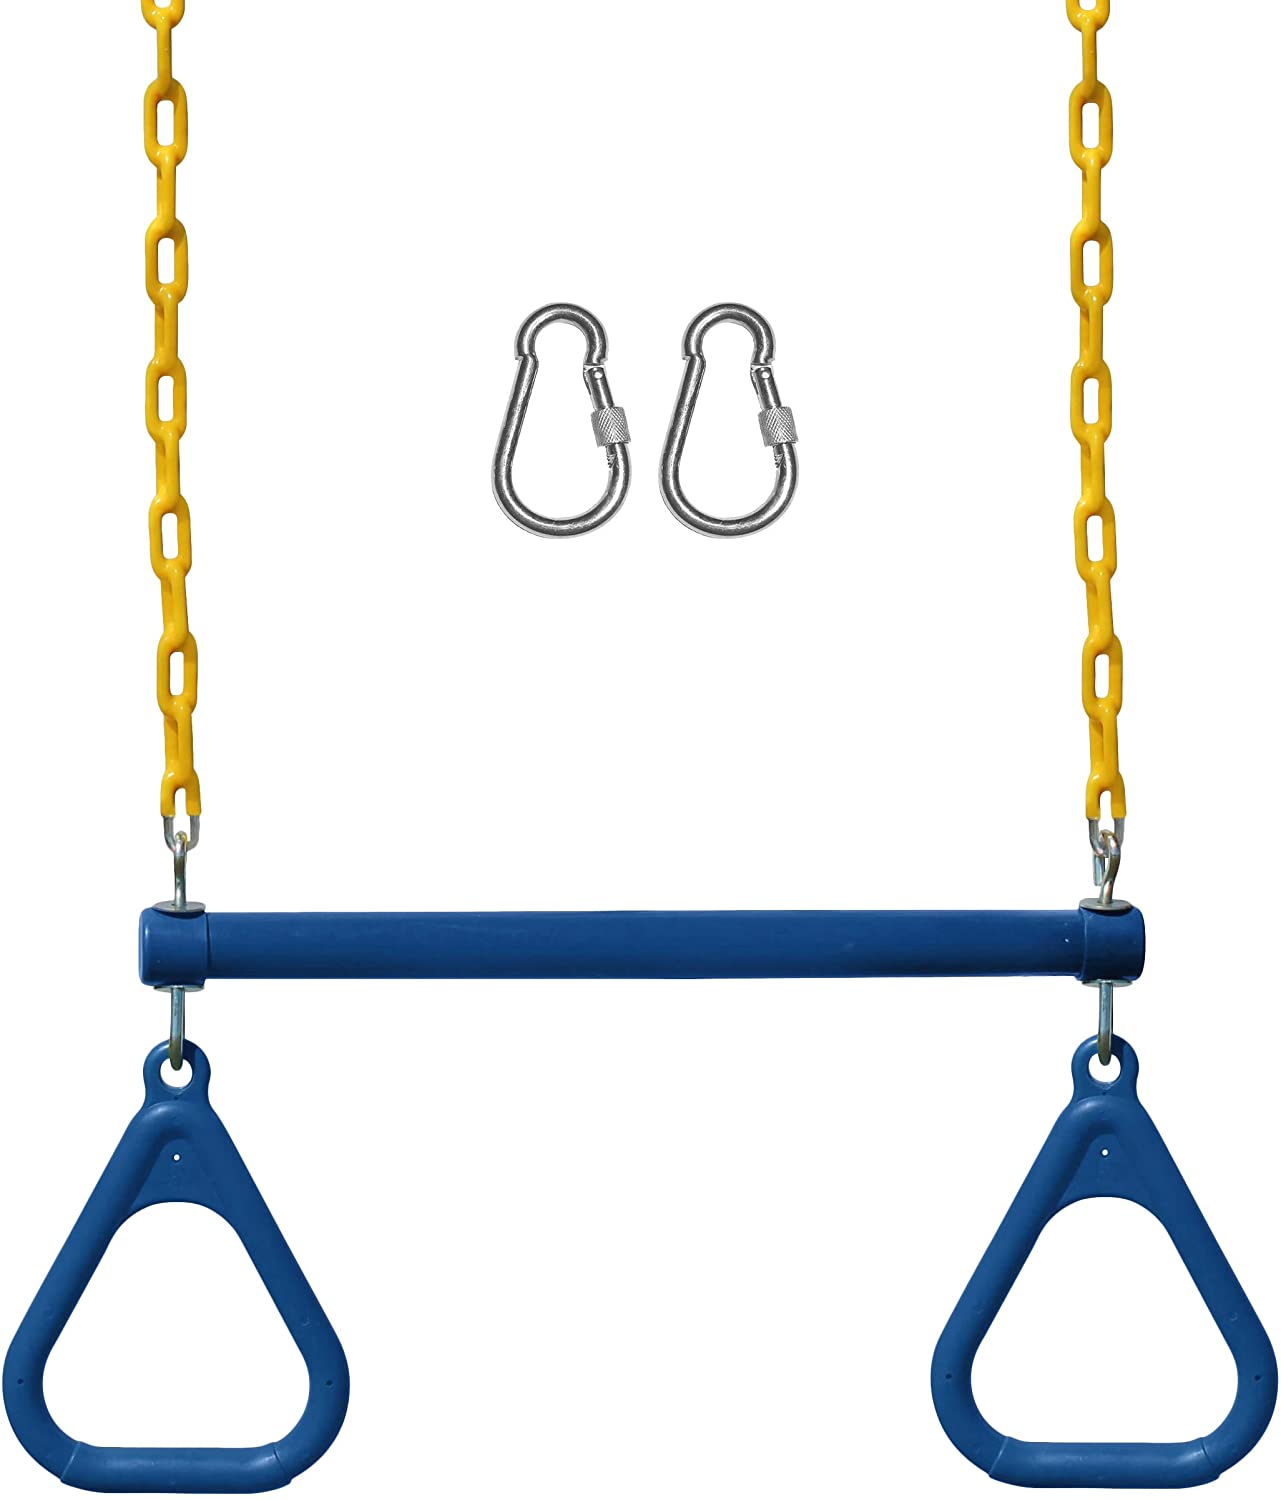 Acrobatic Swing Set for Young Athletes